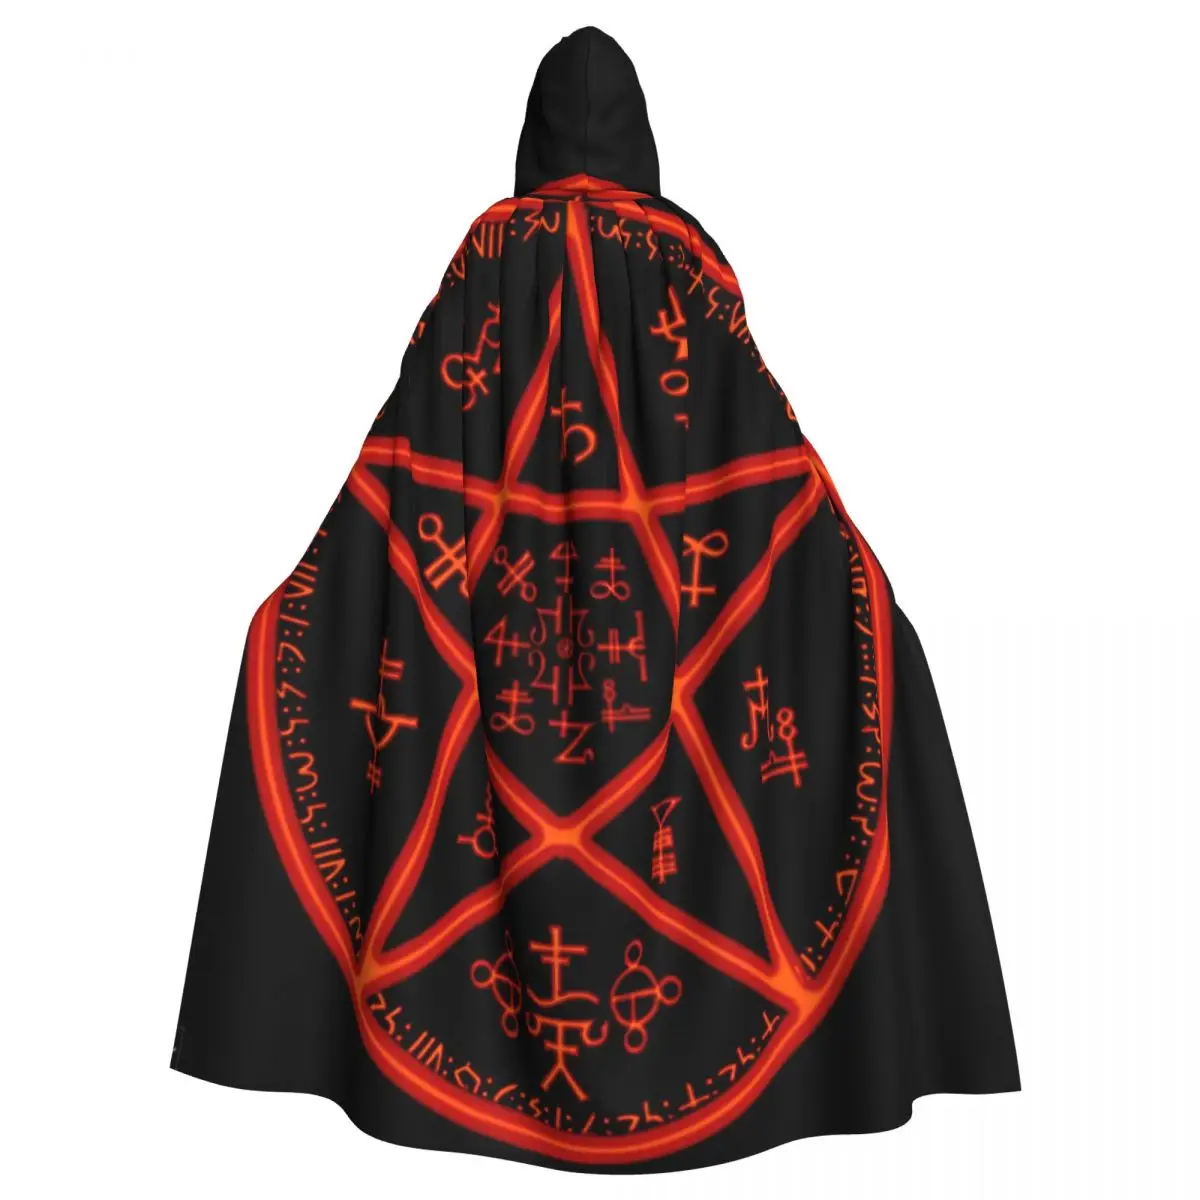 

Purims Unisex Adult Wiccan Symbol Mandala Witches Runes Baphomet And Lucifer Cloak with Hood Long Witch Costume Cosplay